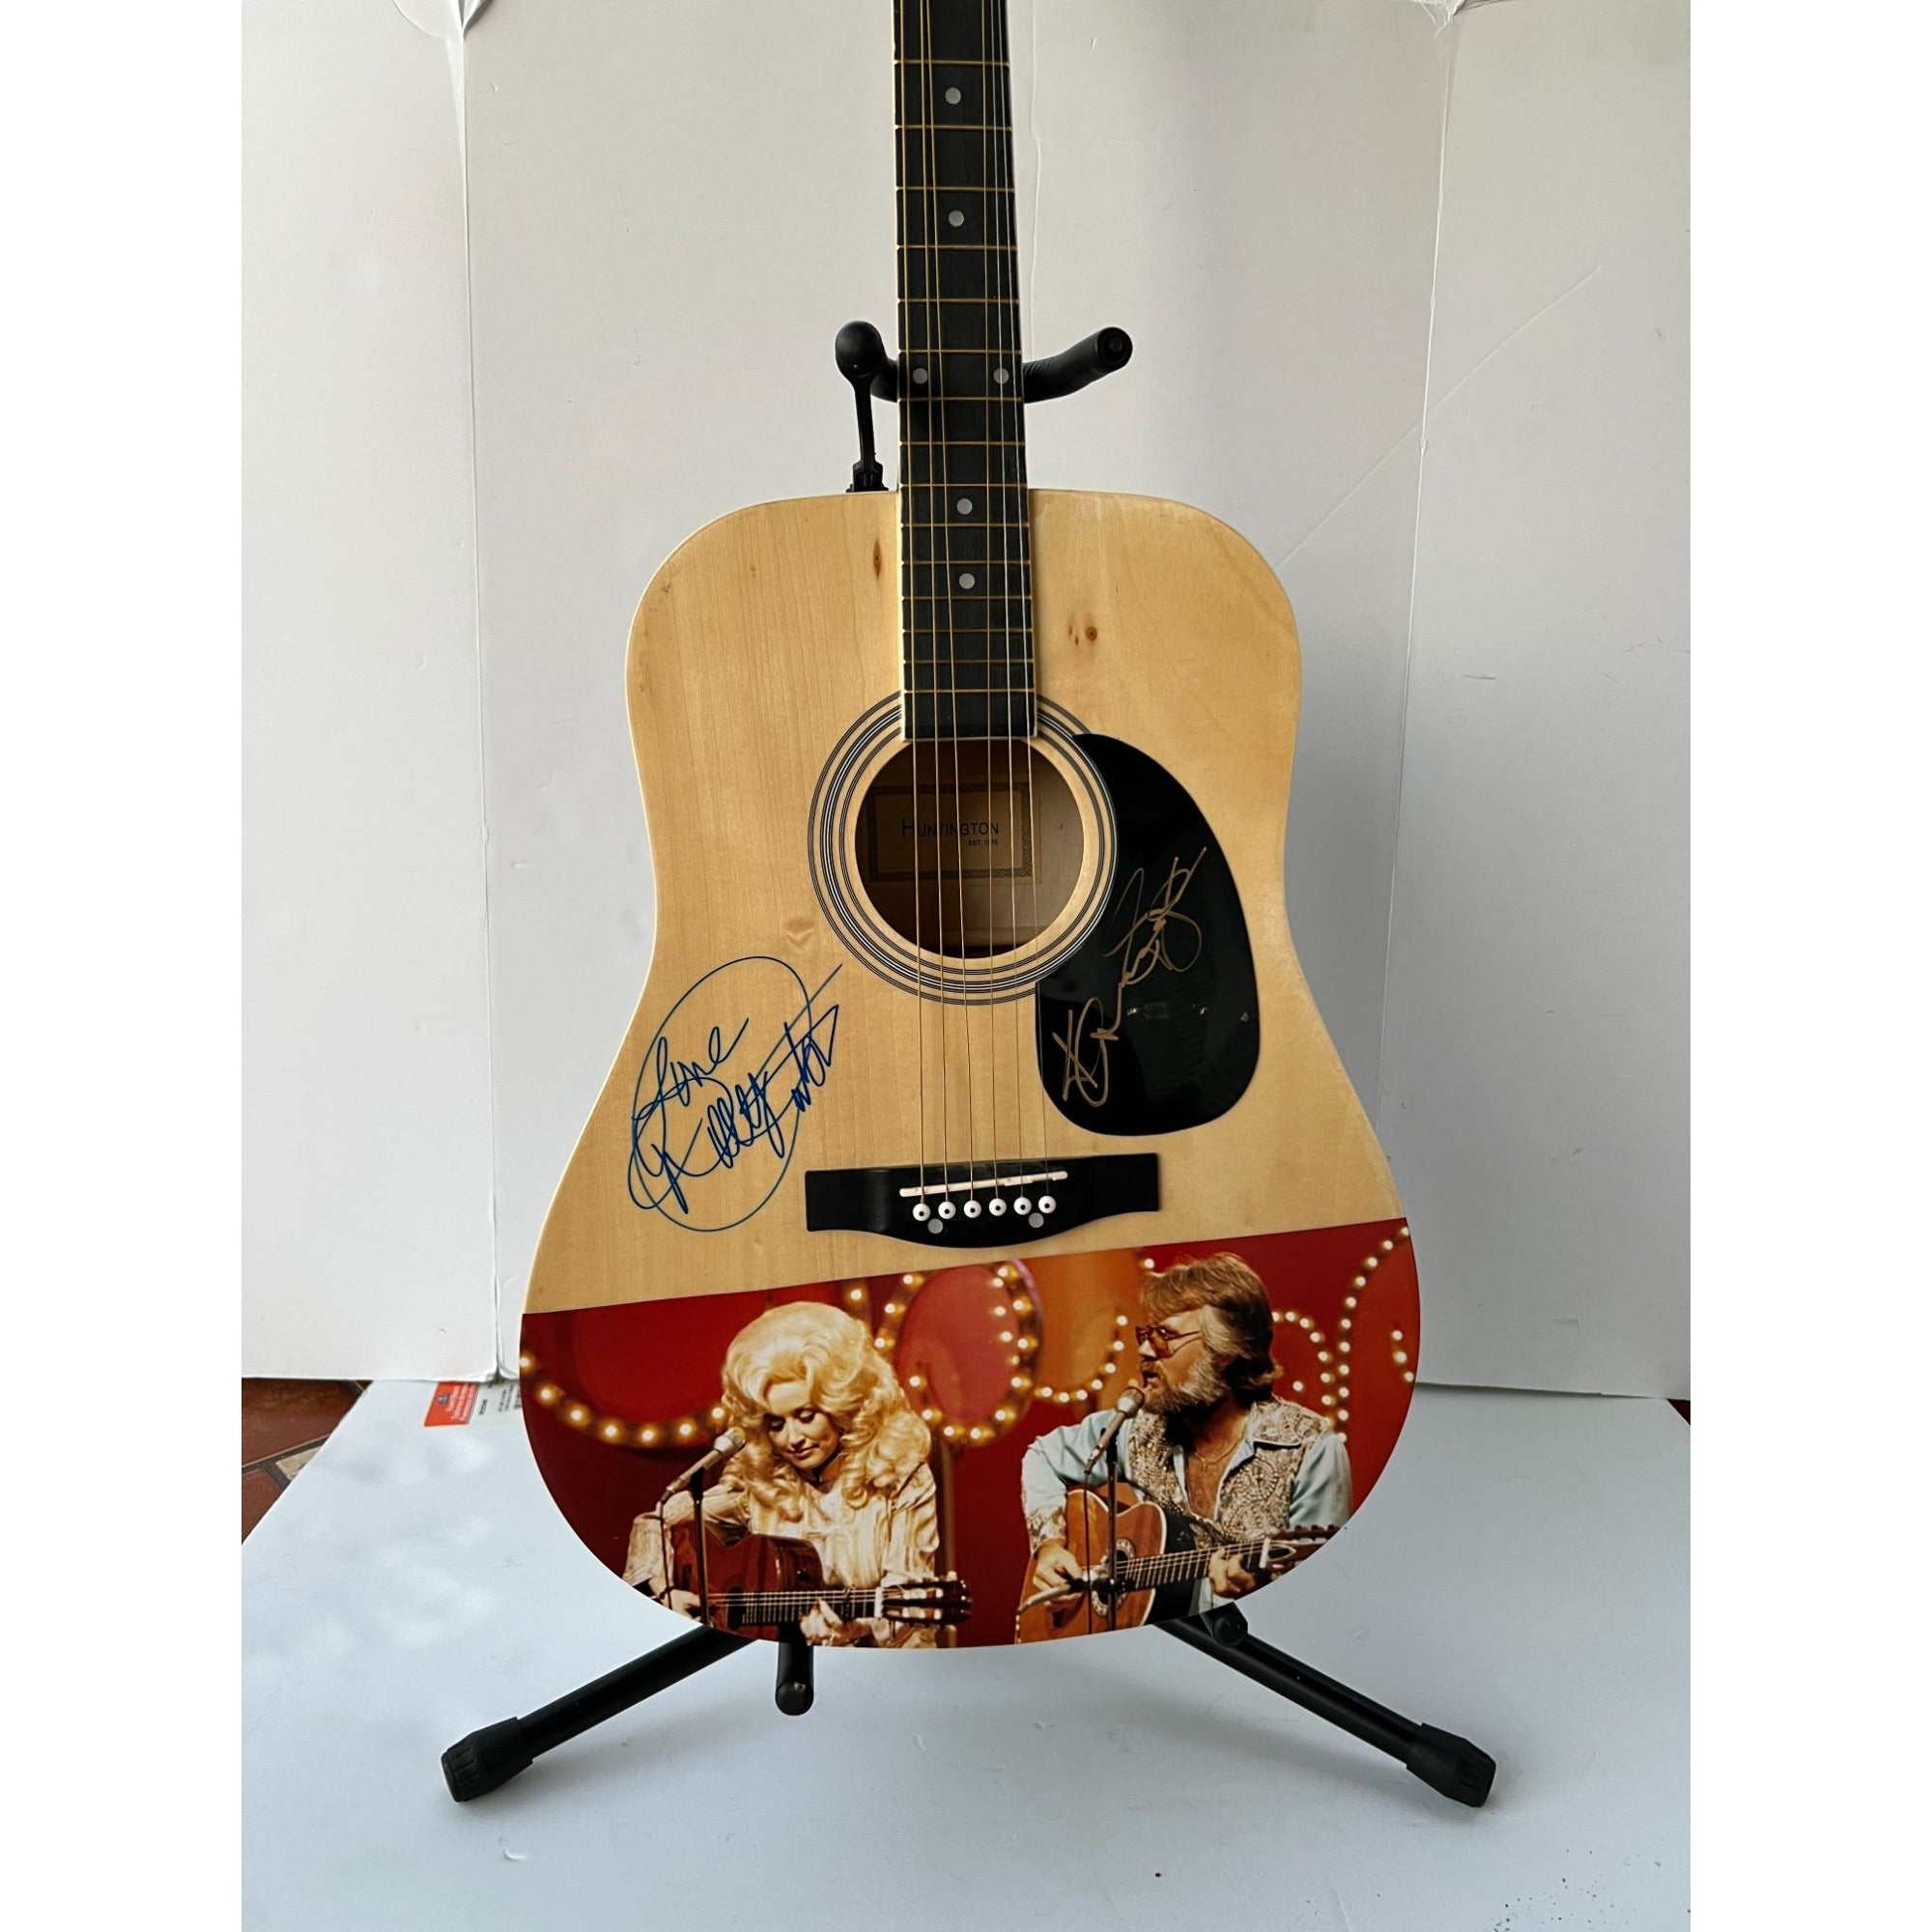 Dolly Parton and Kenny Rogers One of a Kind guitar signed with proof